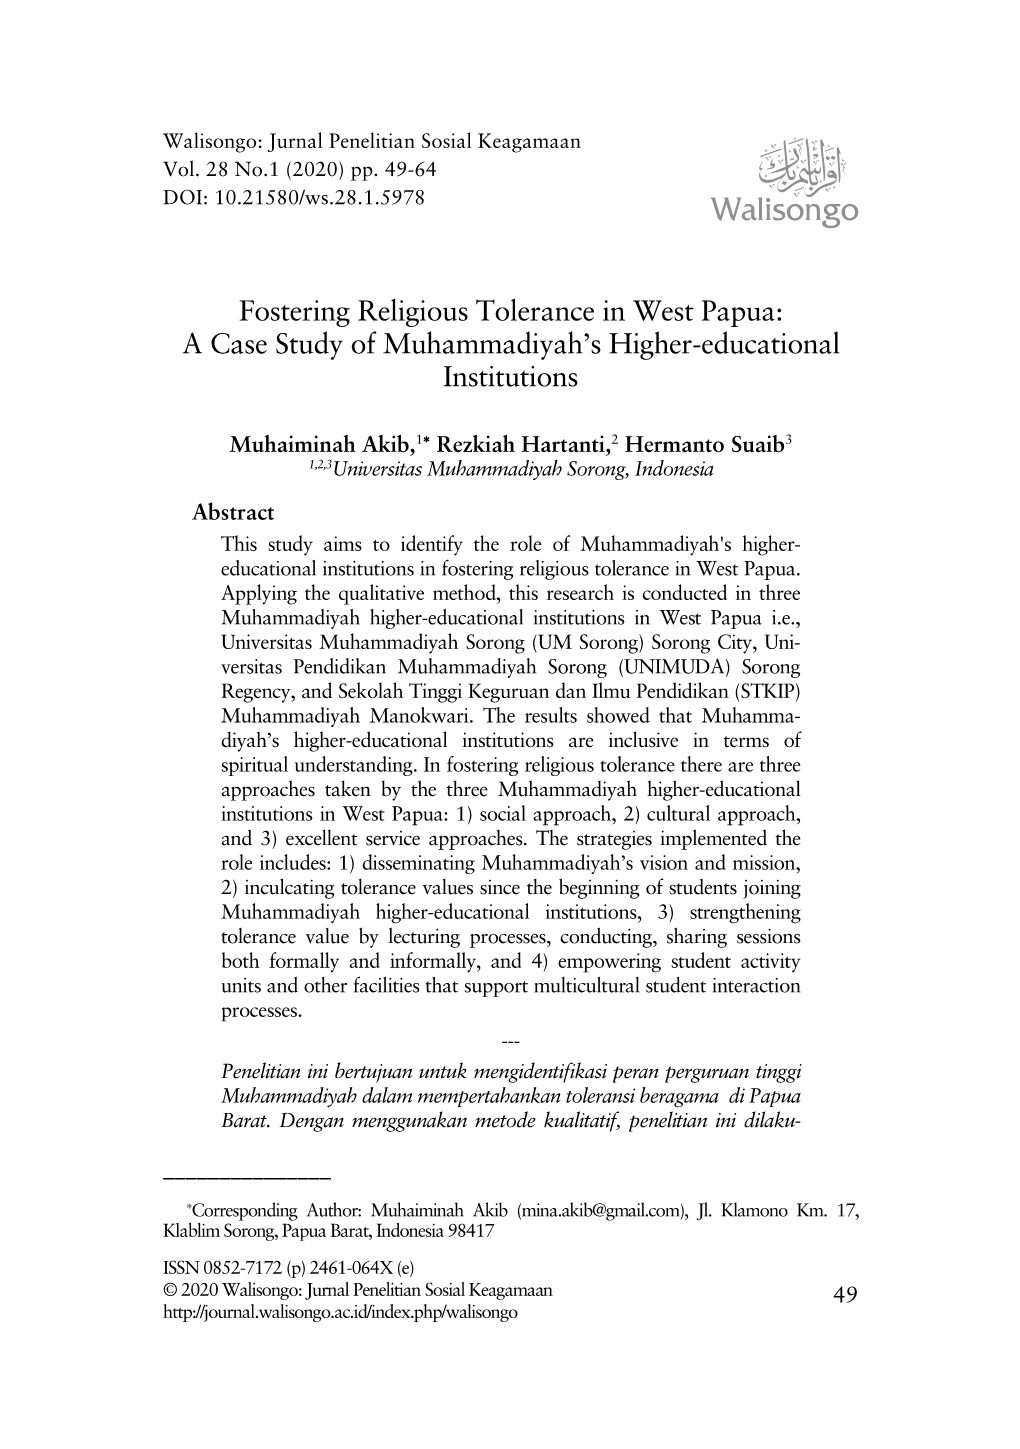 Fostering Religious Tolerance in West Papua: a Case Study of Muhammadiyah’S Higher-Educational Institutions